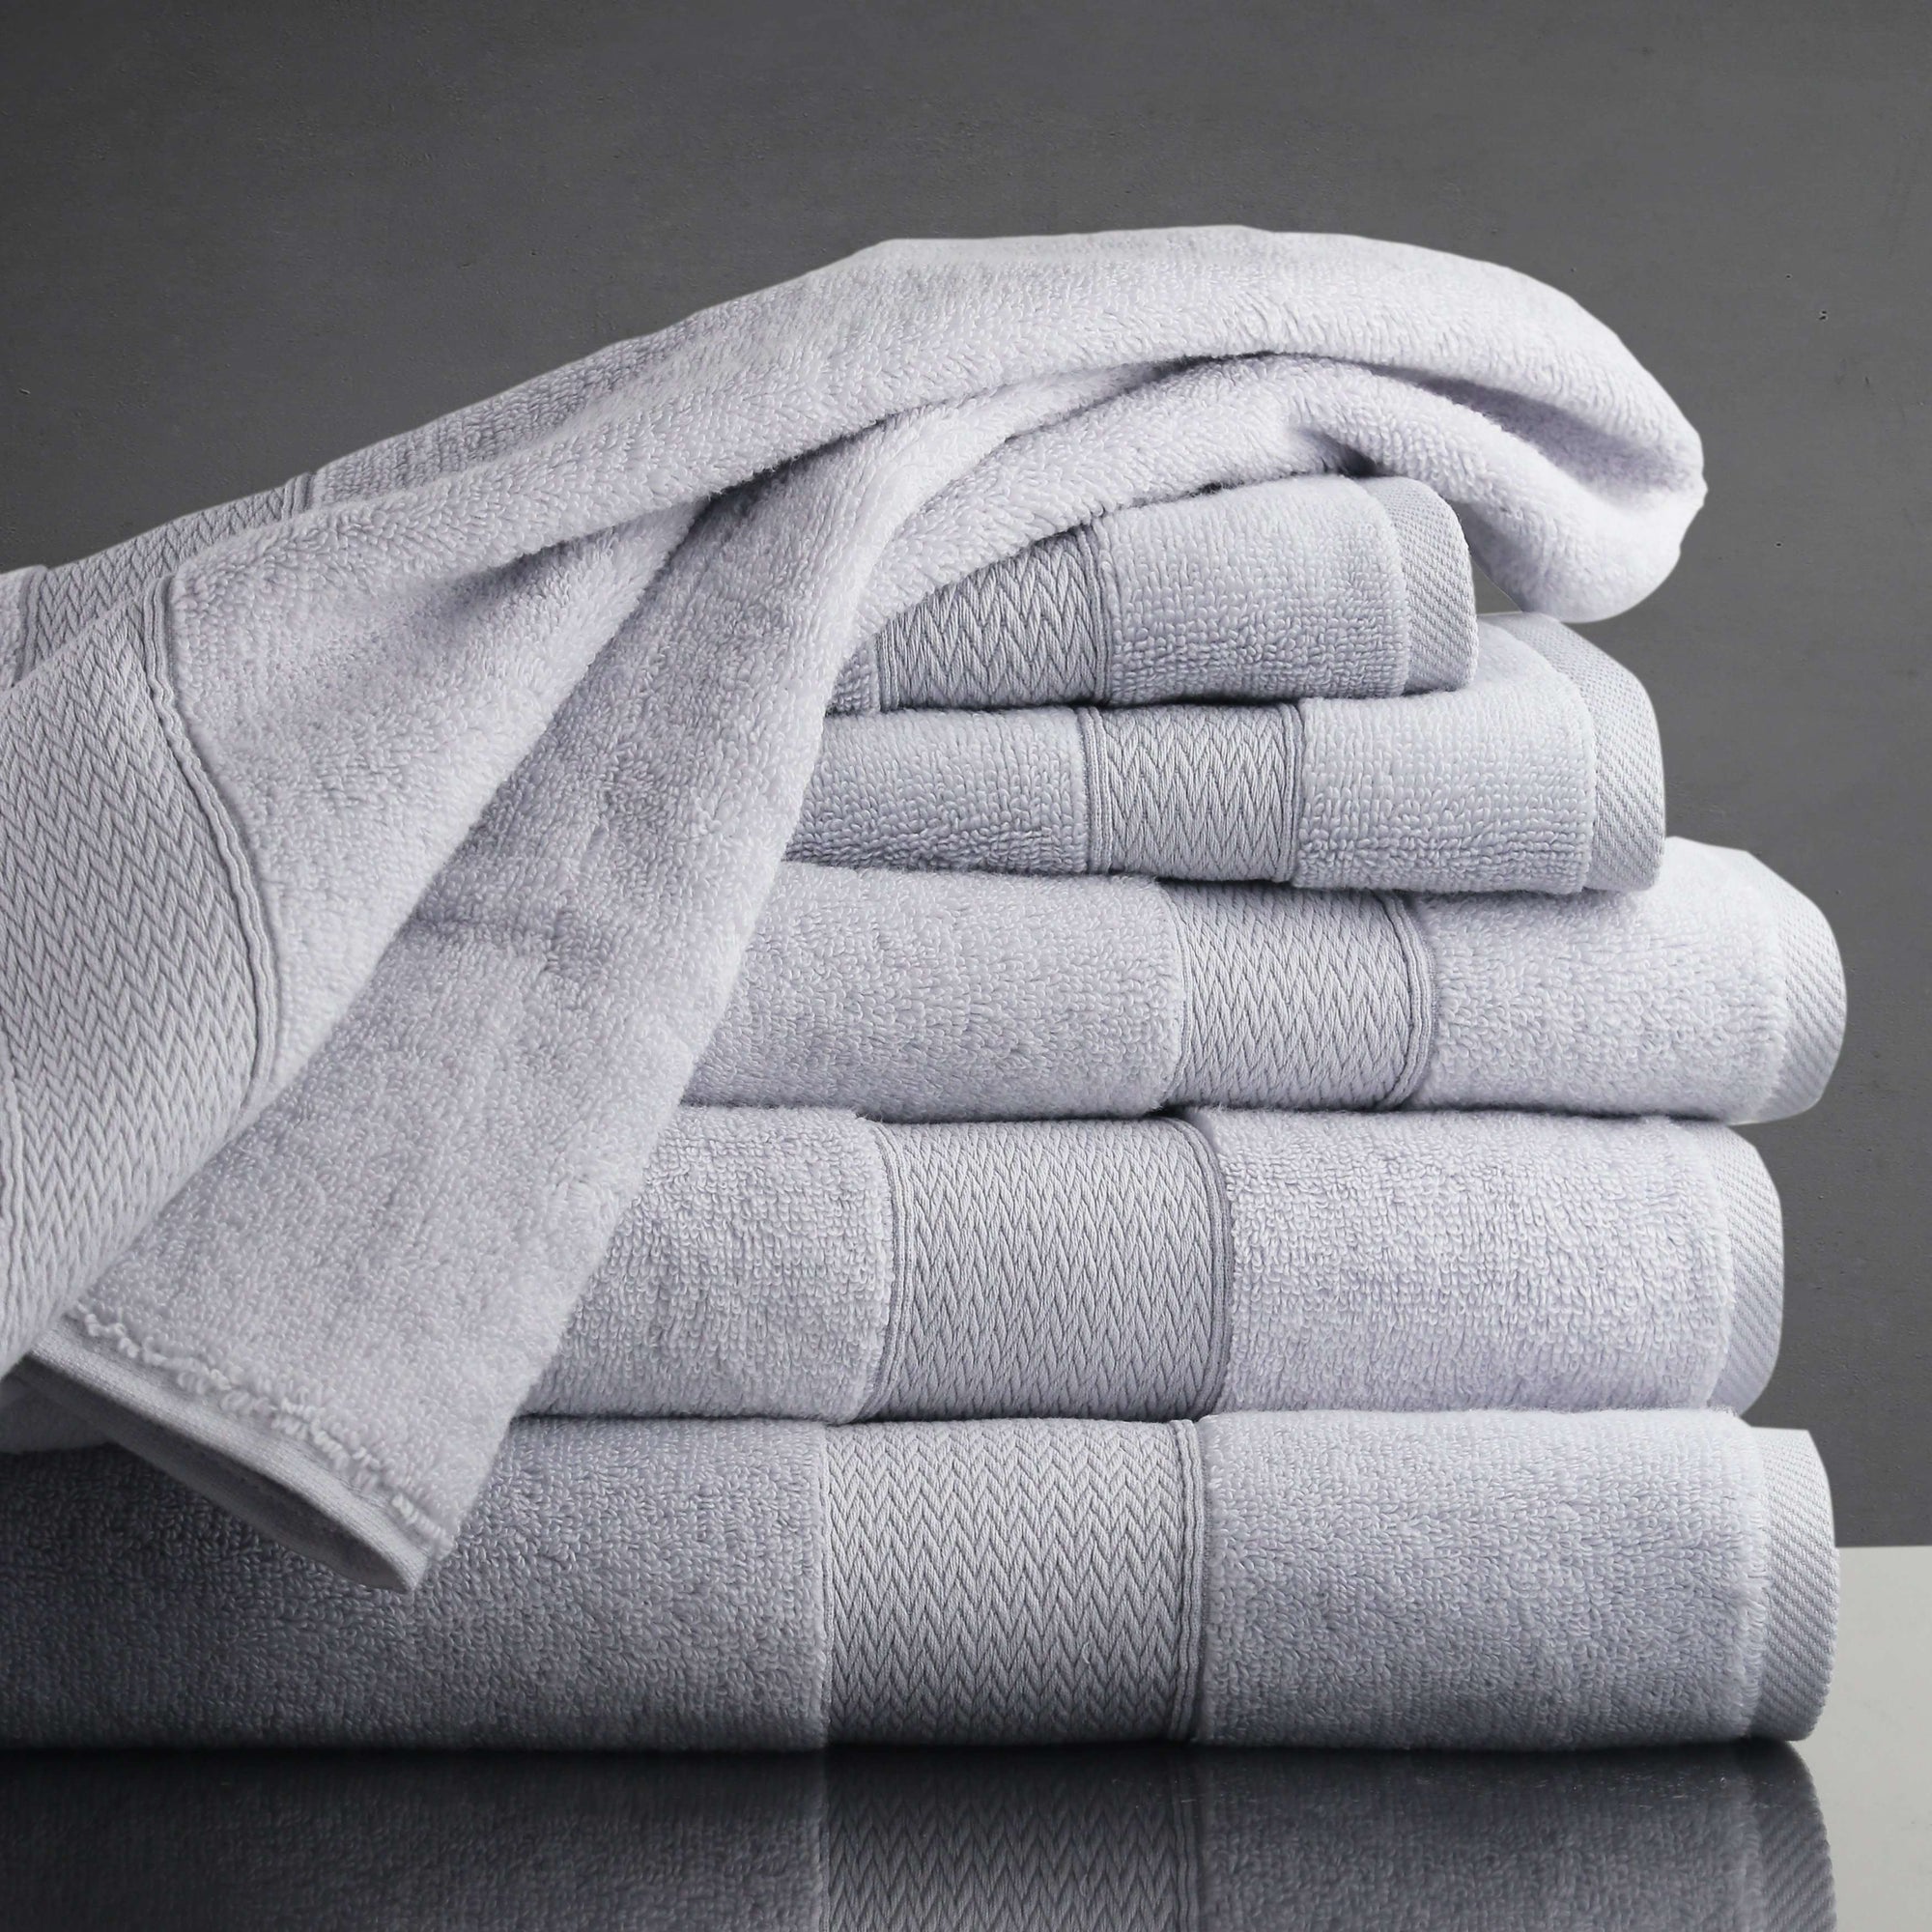 Classic Turkish Towels - Luxury towels made from 100% Turkish cotton